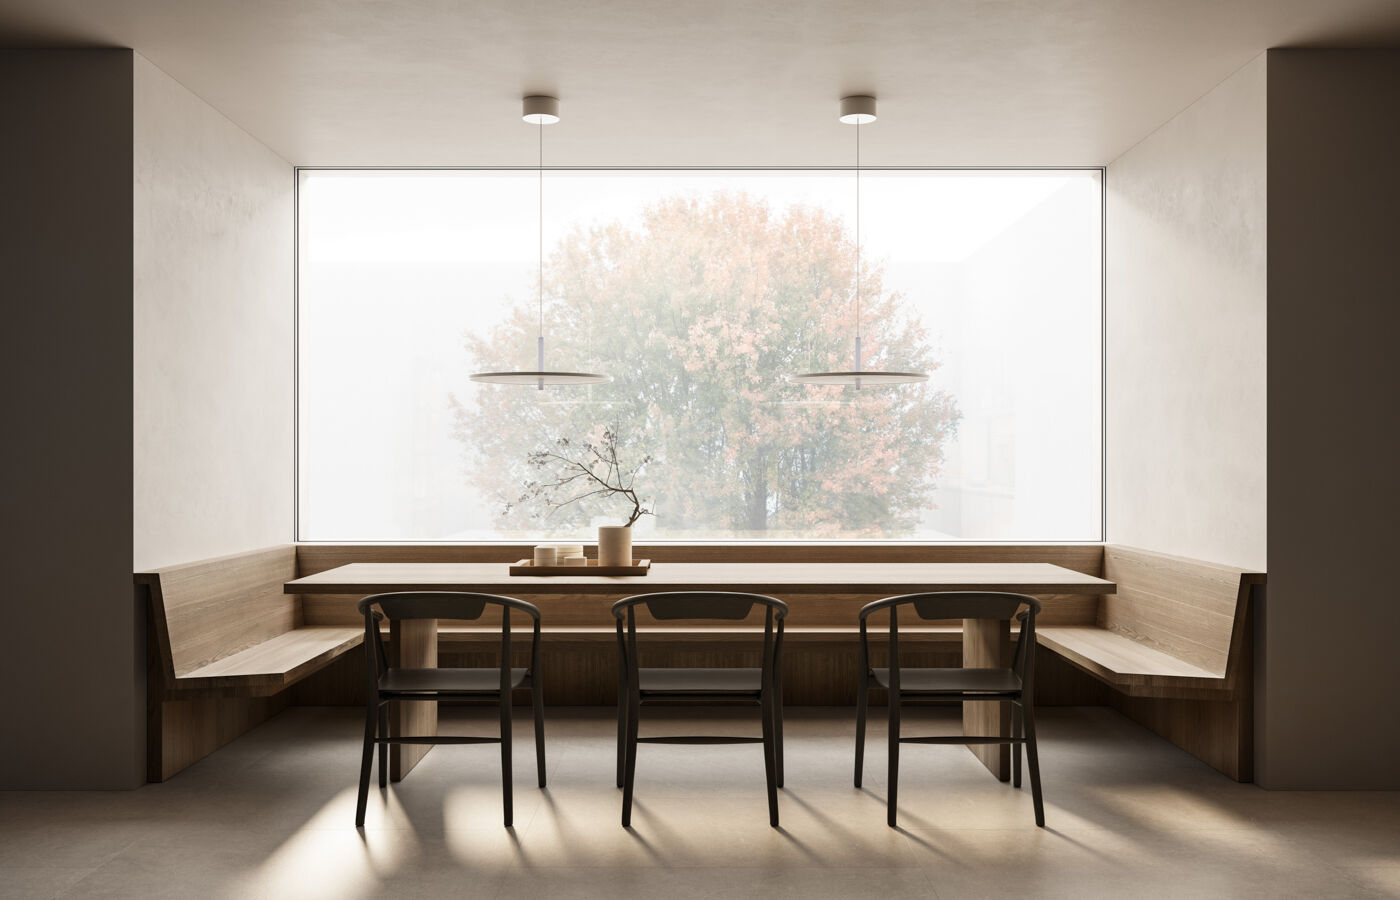 A well-lit dining room with a wooden table and comfortable chairs, inviting for a meal or gathering.